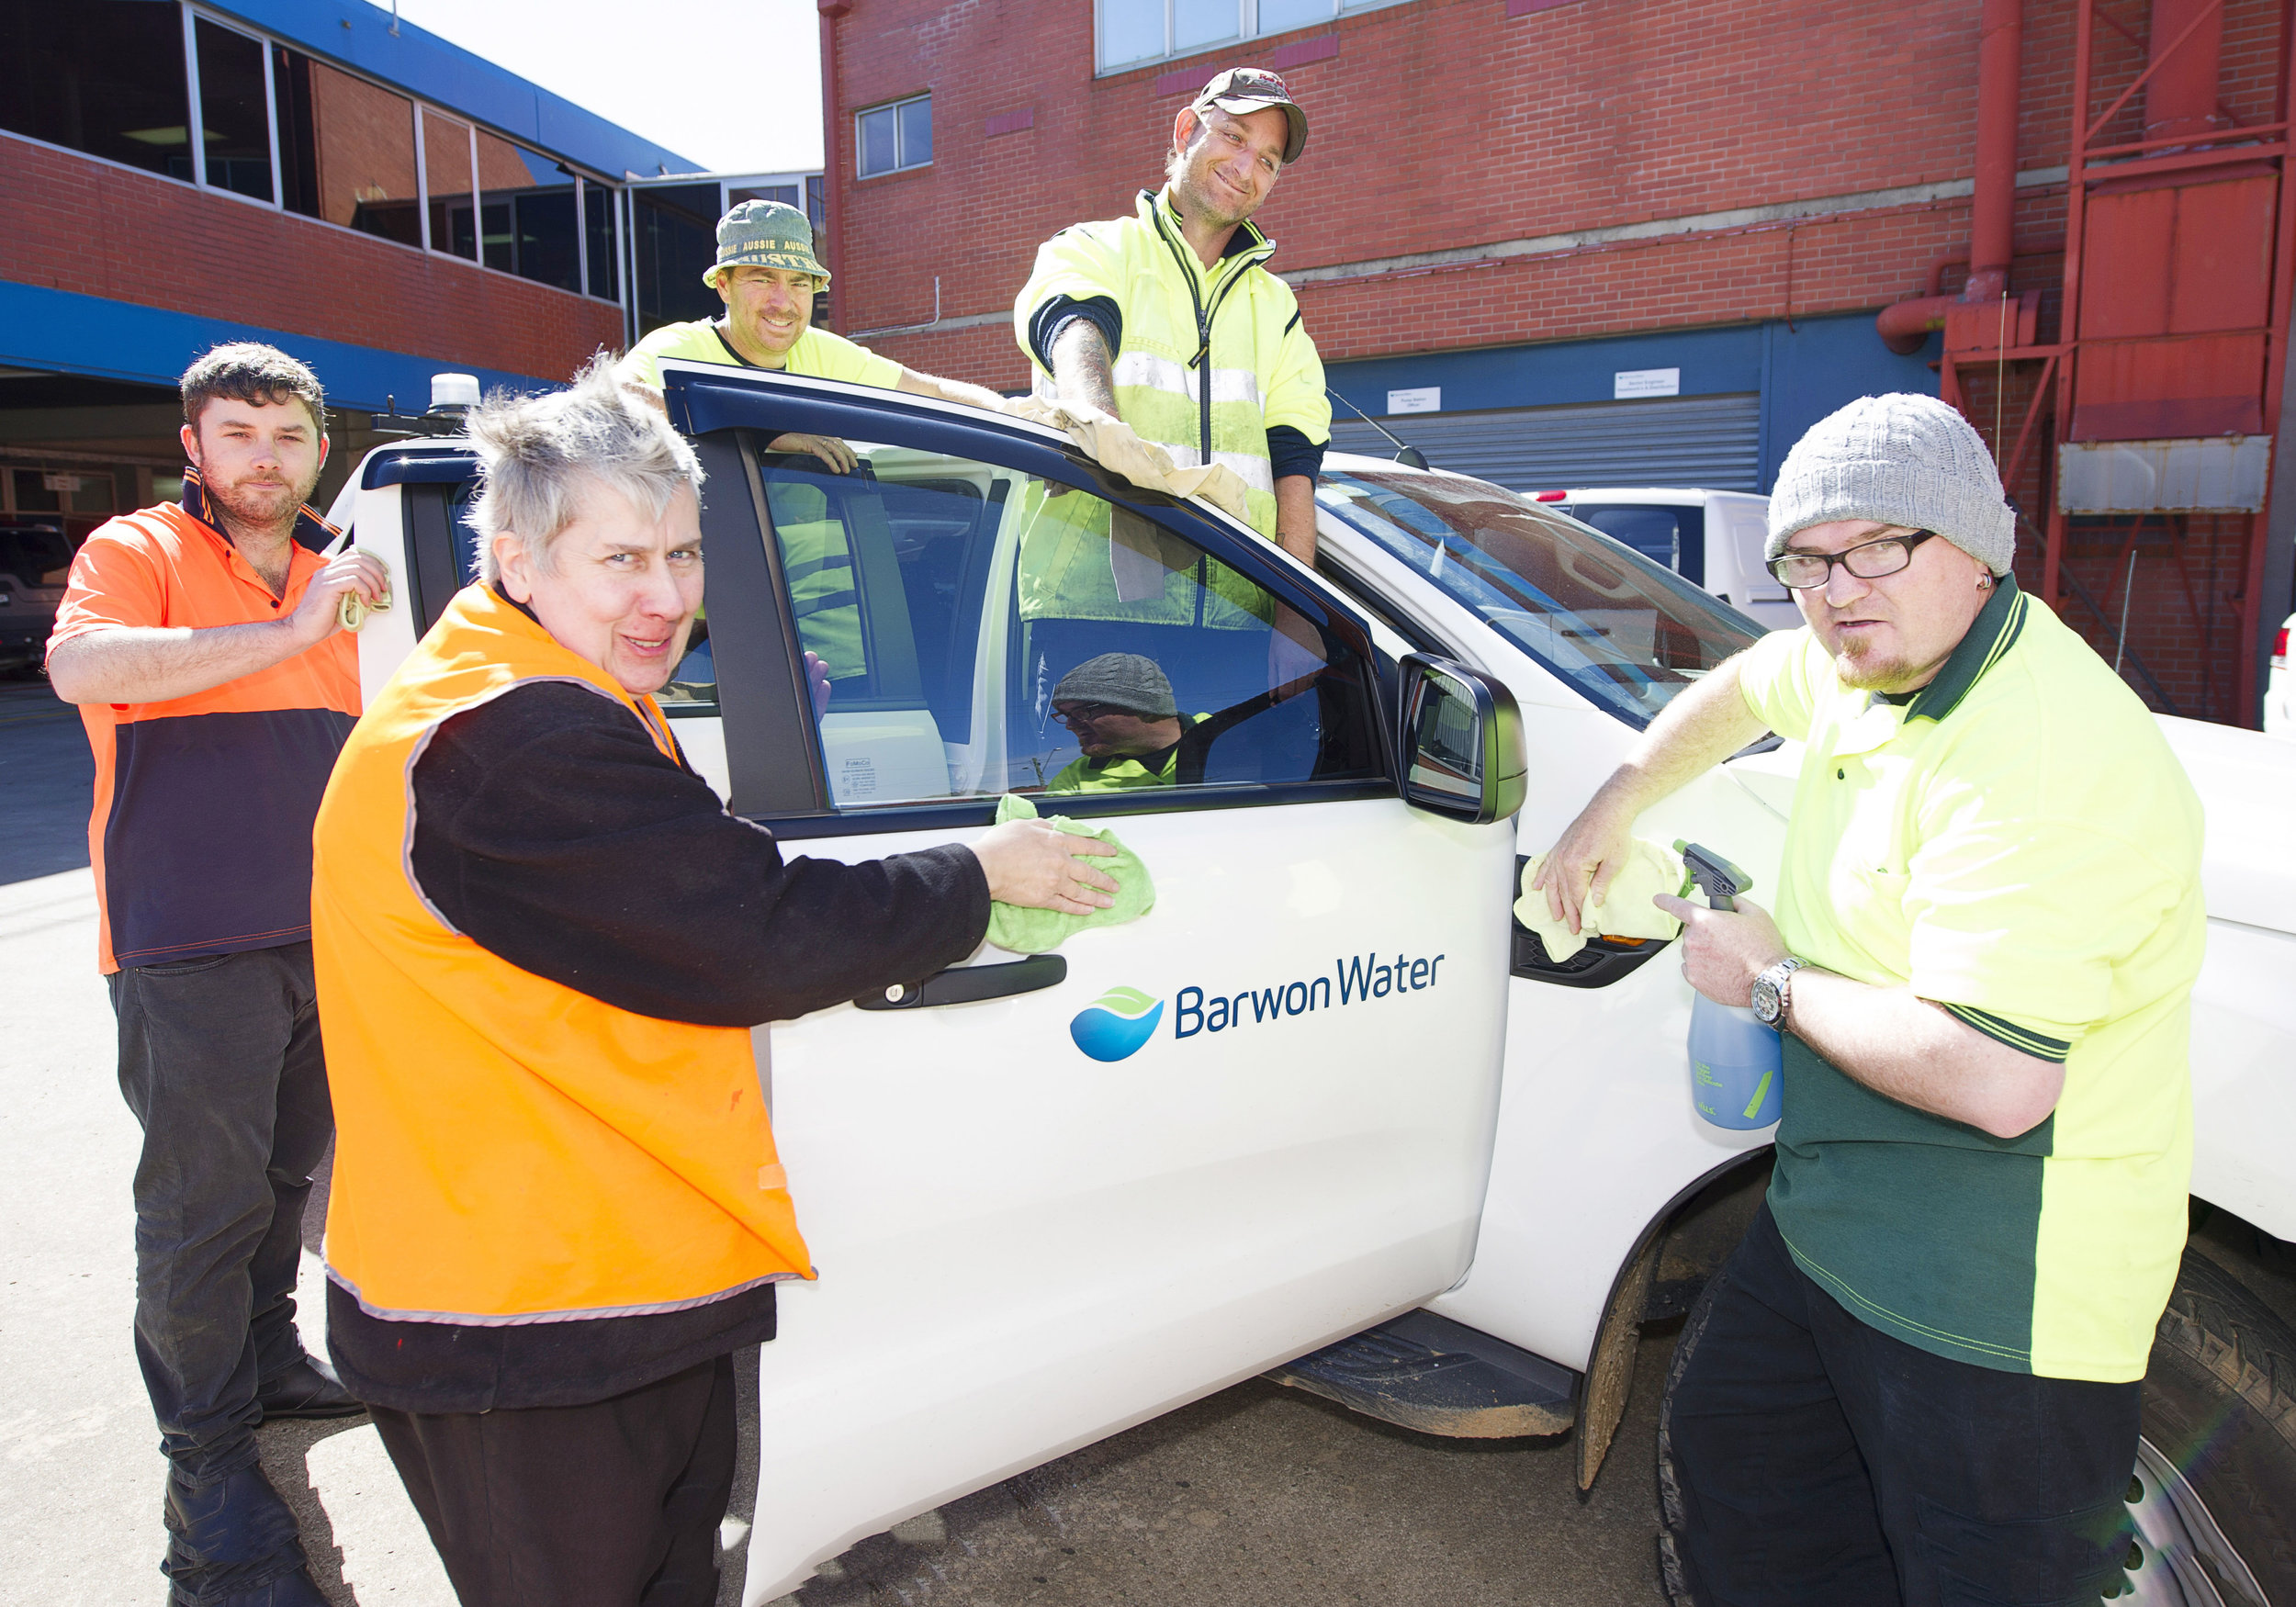 Trainees from genU cleaning Barwon Water vehicles, recruited as part of the GROW project.